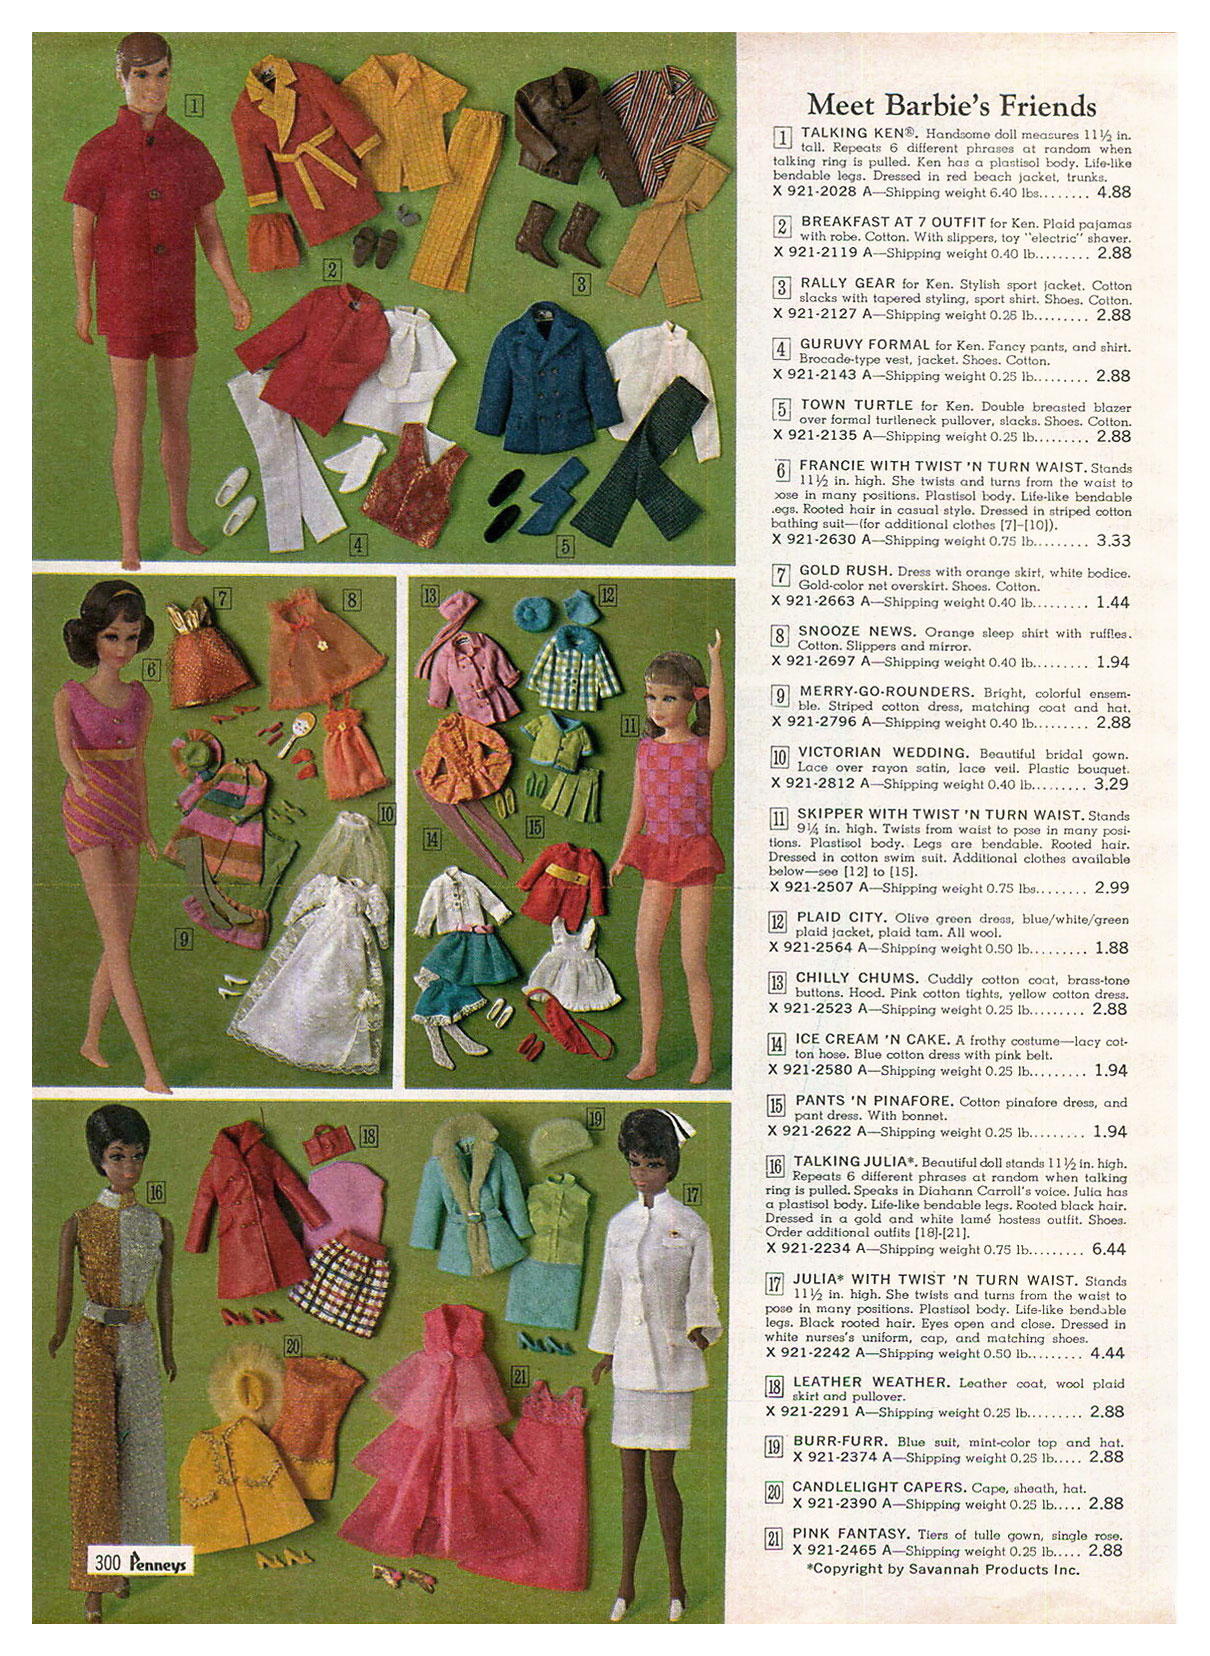 From 1969 JCPenney catalogue